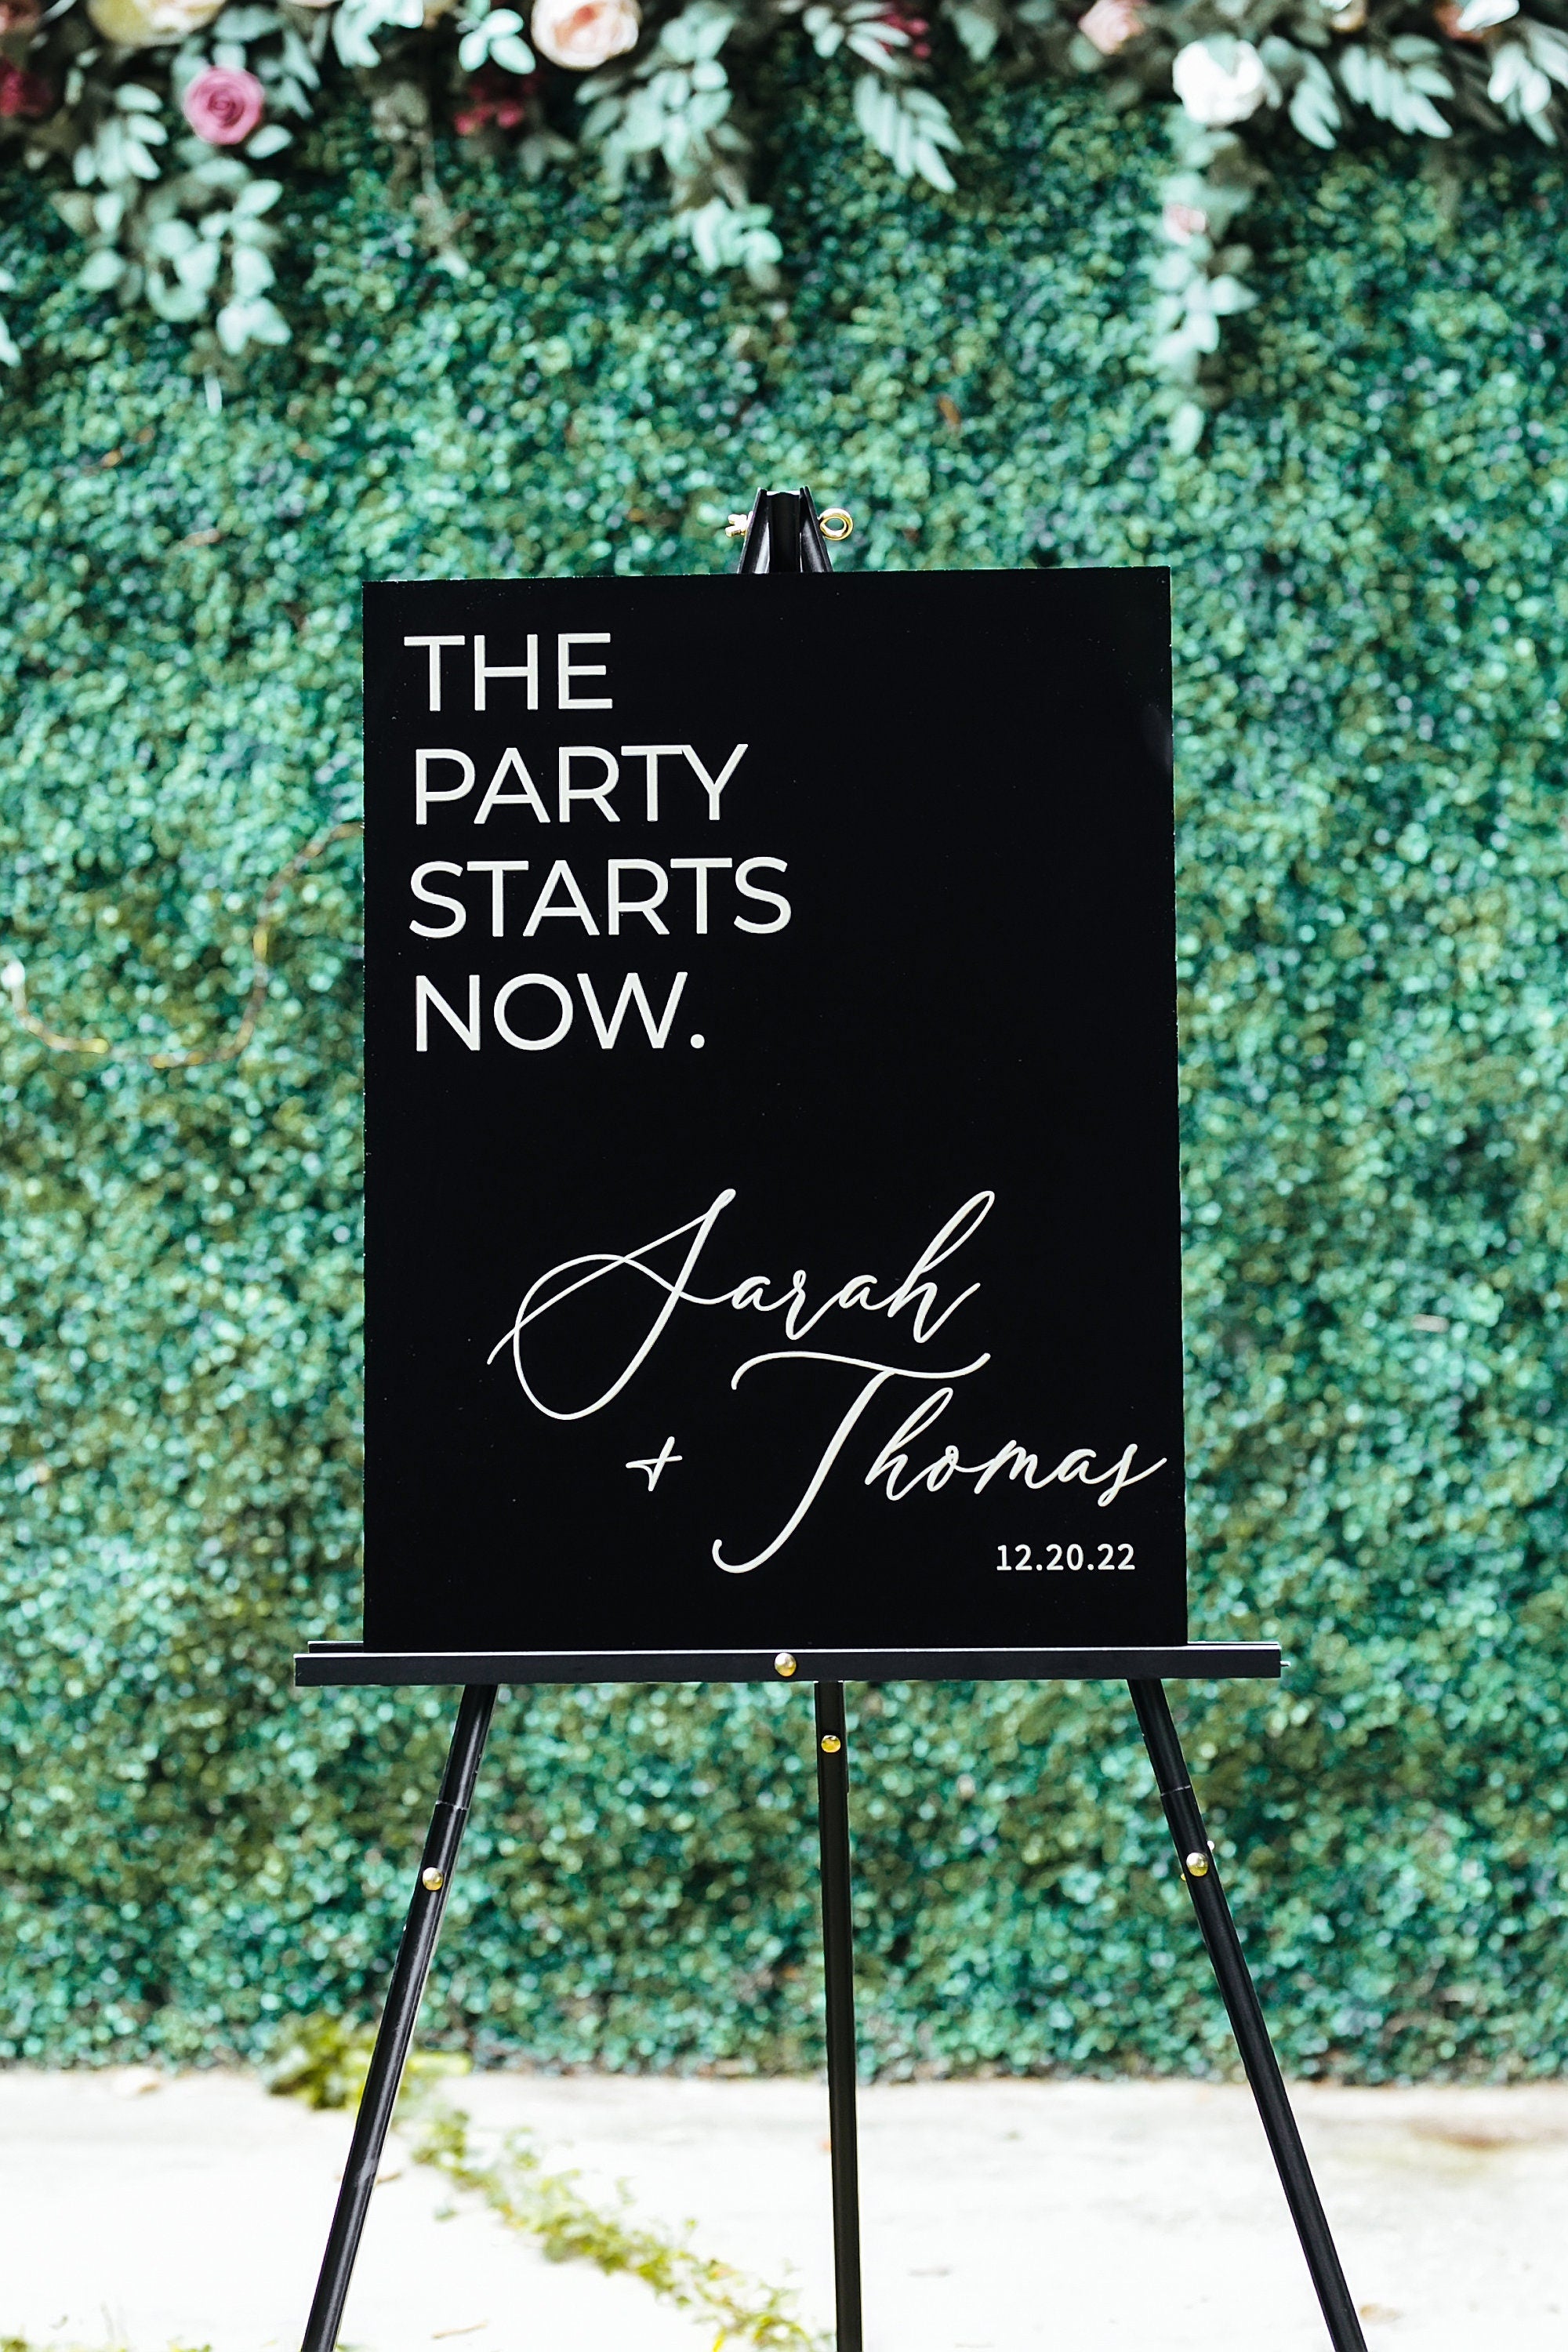 The Party Starts Now Wedding Ceremony or Reception Acrylic Welcome Sign, 18x24 Personalized Modern Lucite, So Glad You're Here